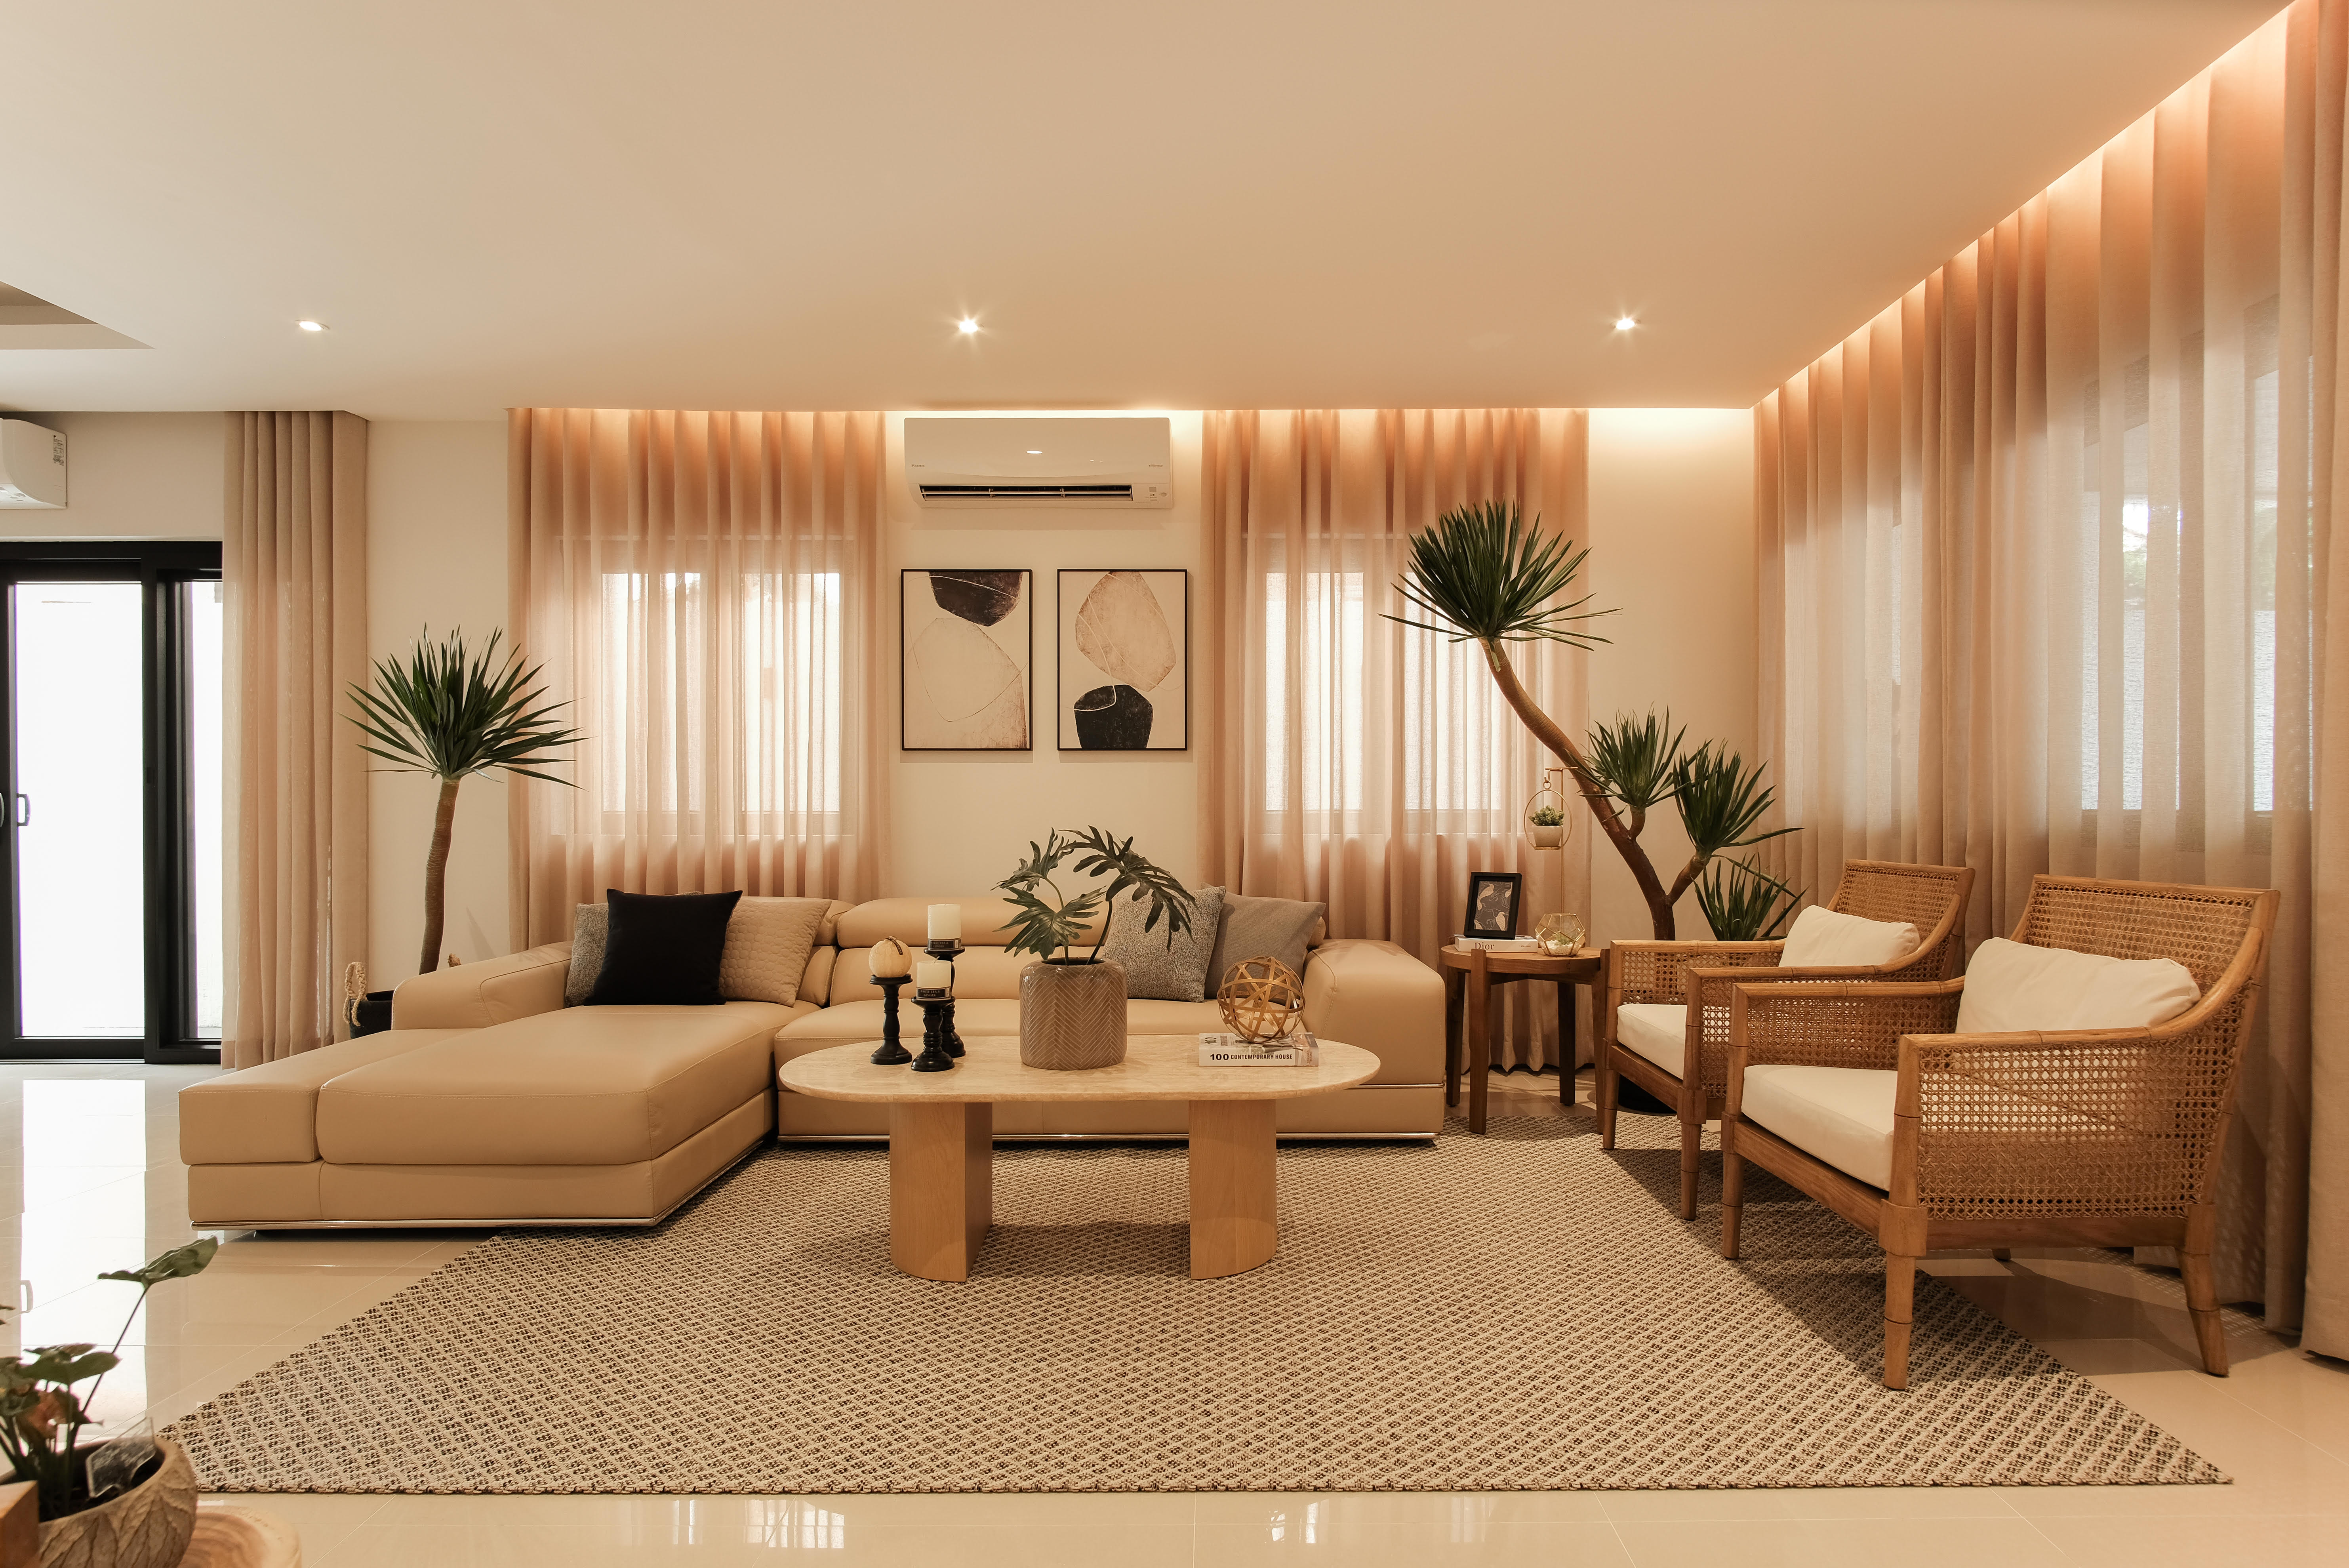 living room with coffee table, curtains, plants, rug